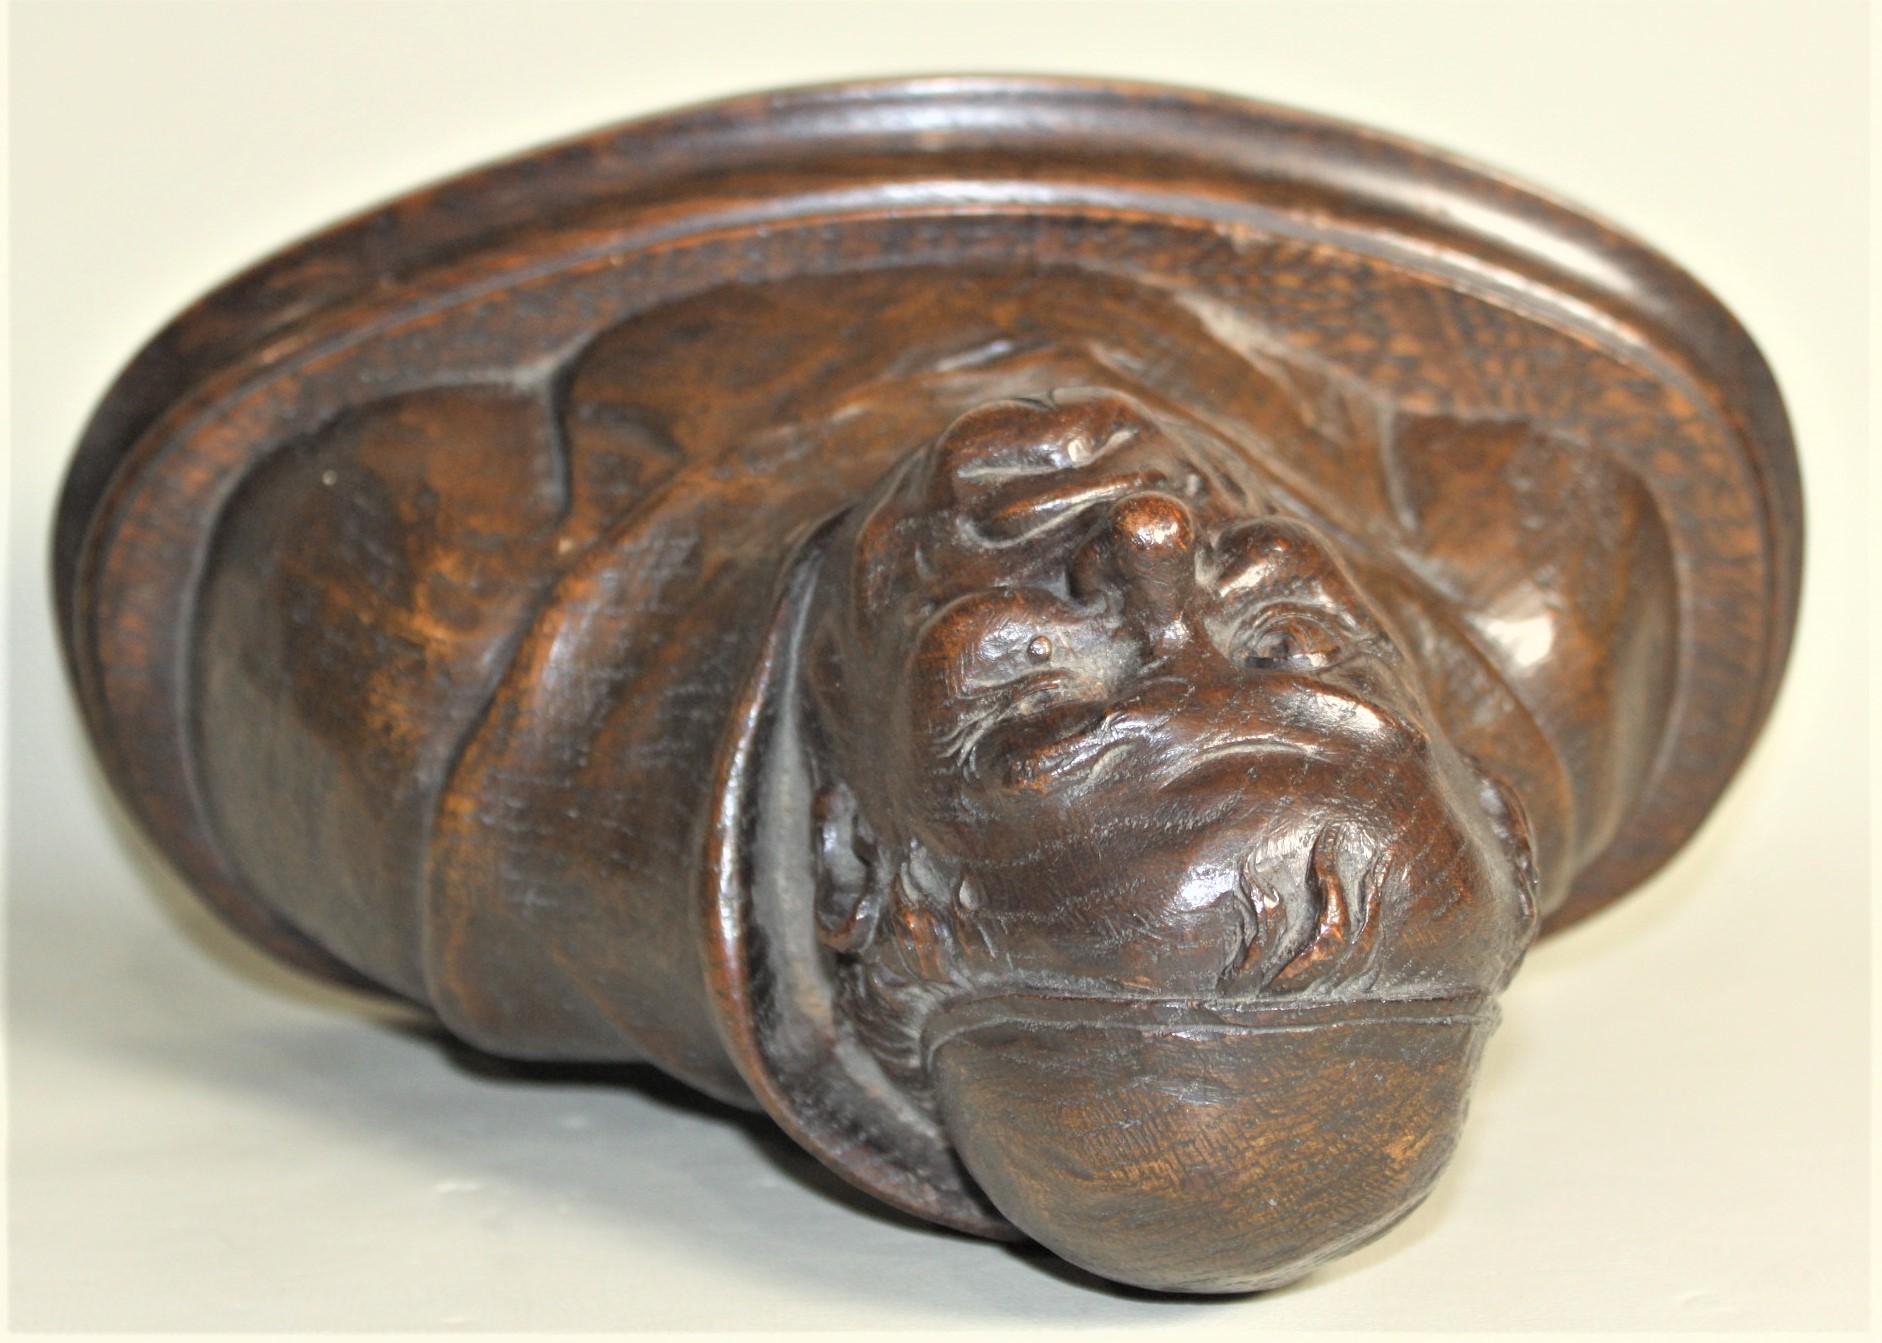 Antique Hand Carved Oak Wood Bust or Sculpture of a Religious Monk or Friar In Good Condition For Sale In Hamilton, Ontario